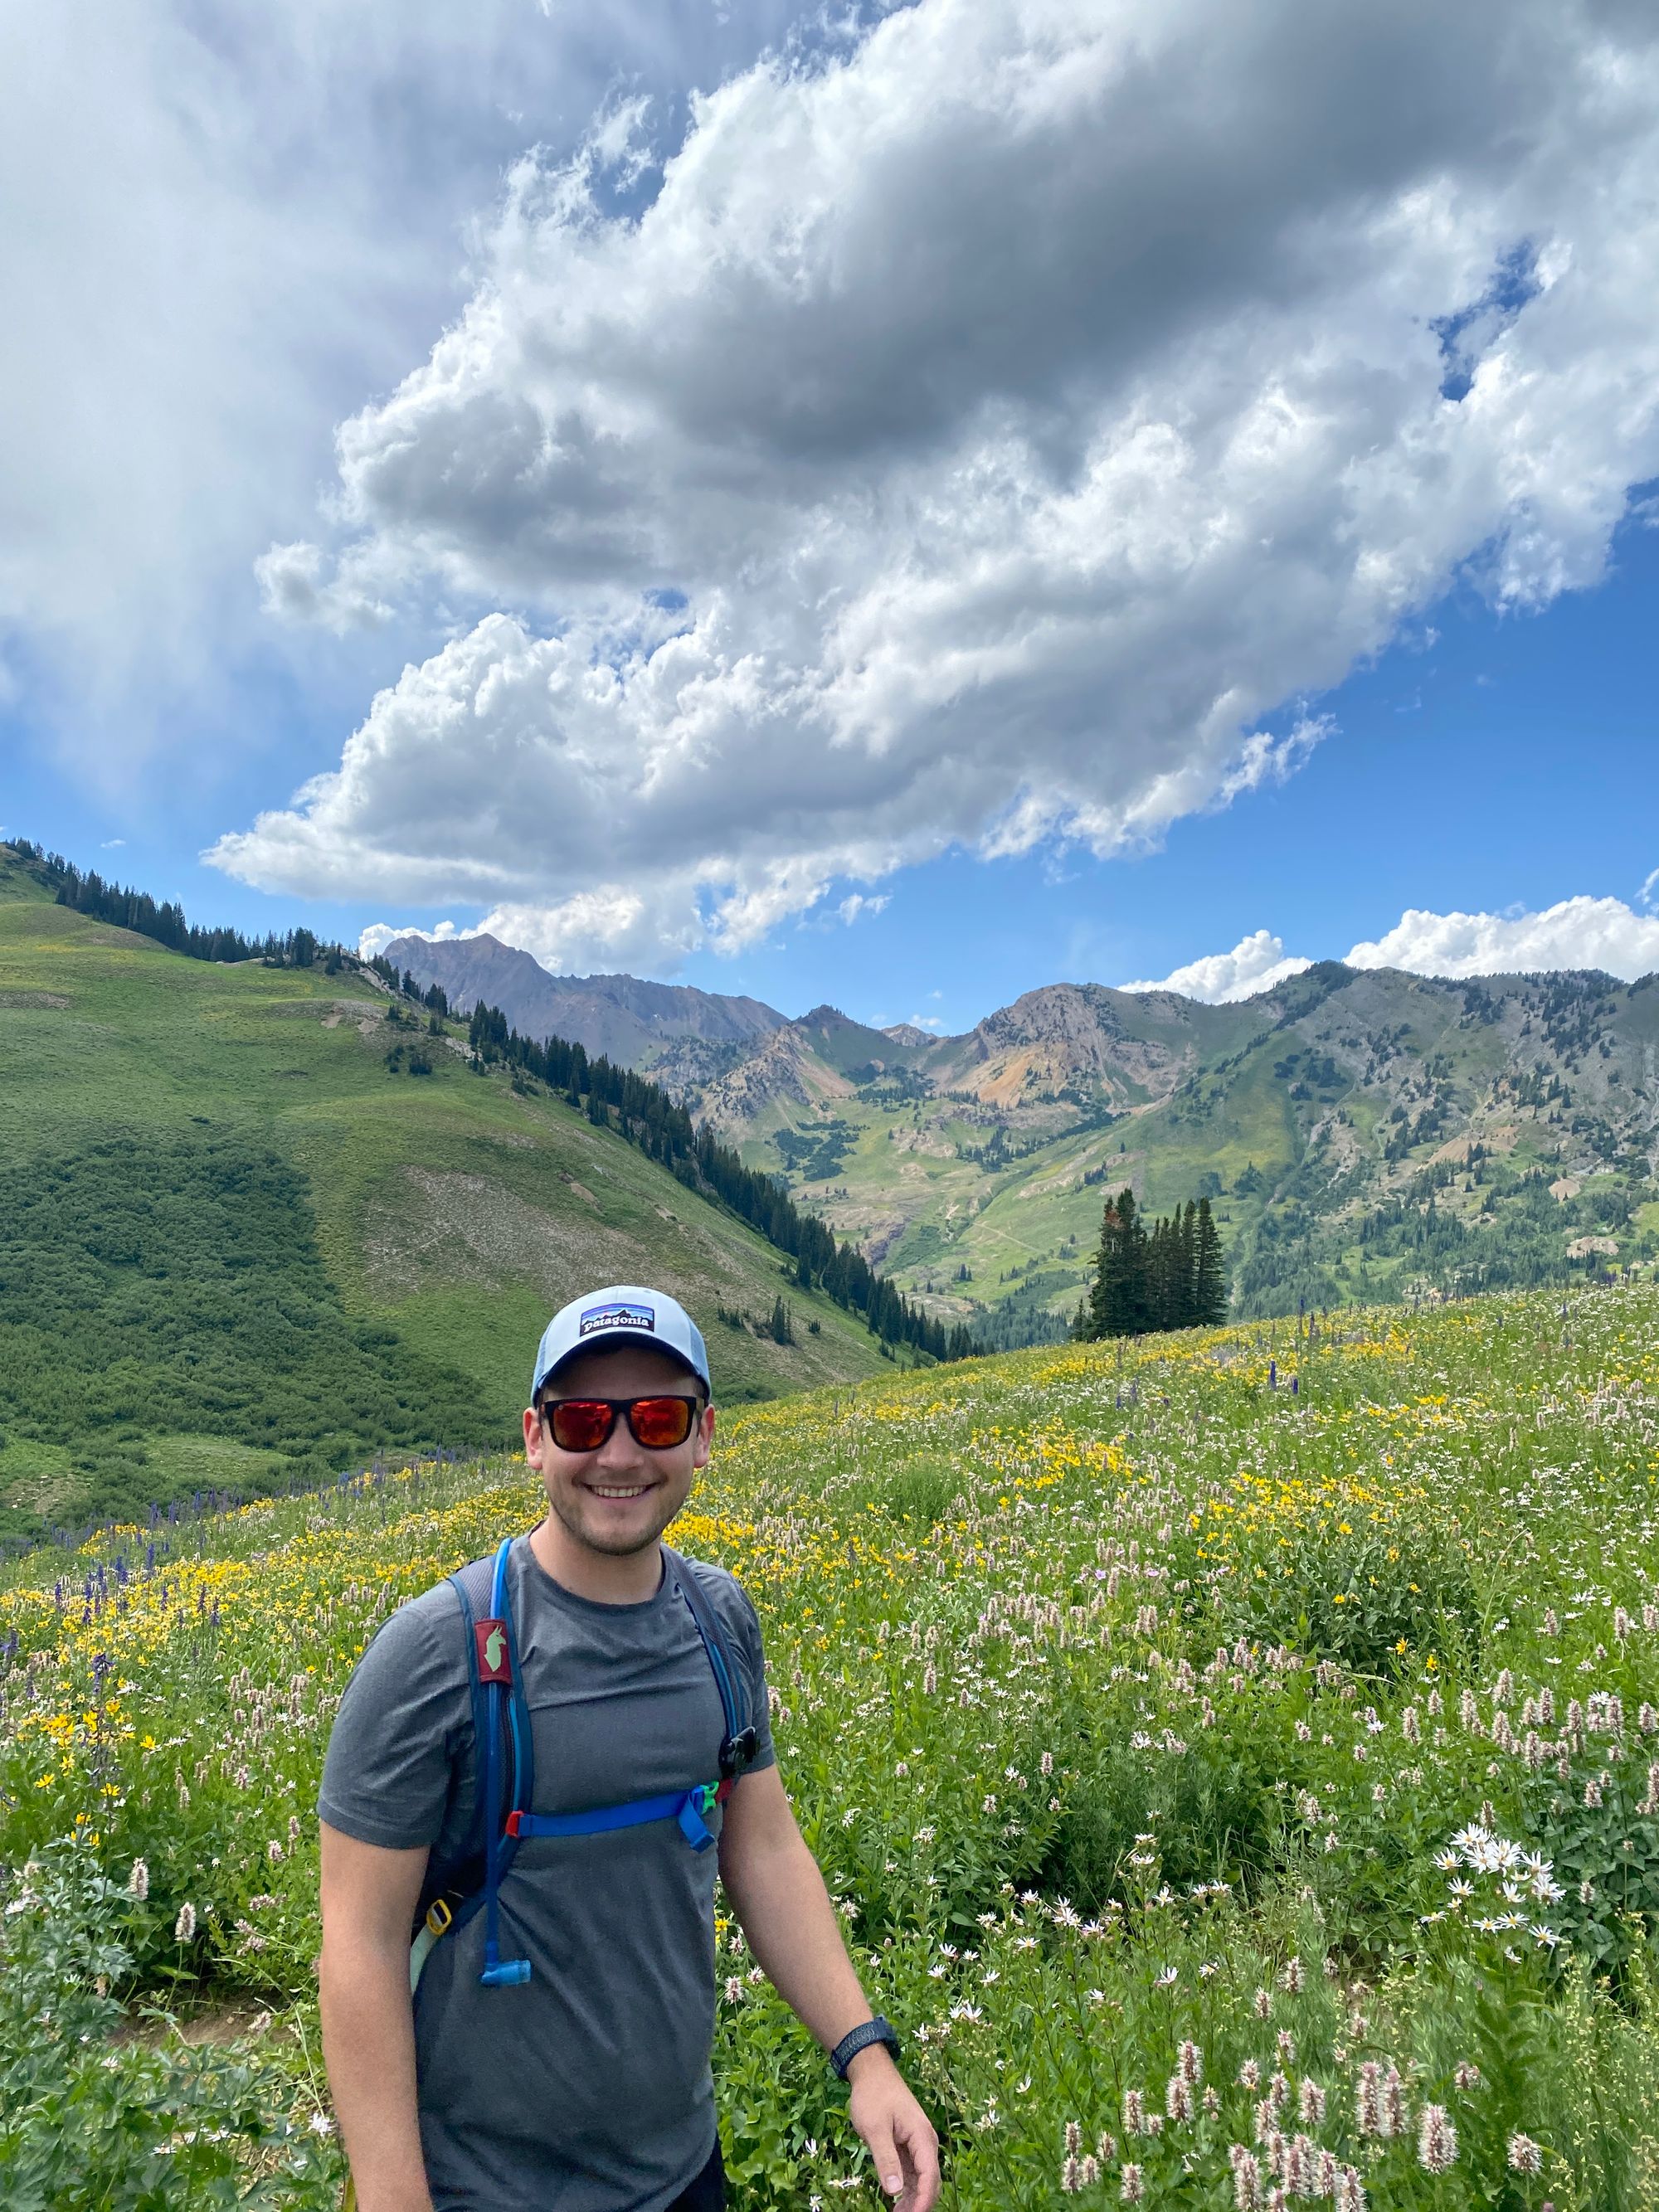 The wildflowers are popping in Salt Lake City's mountains!